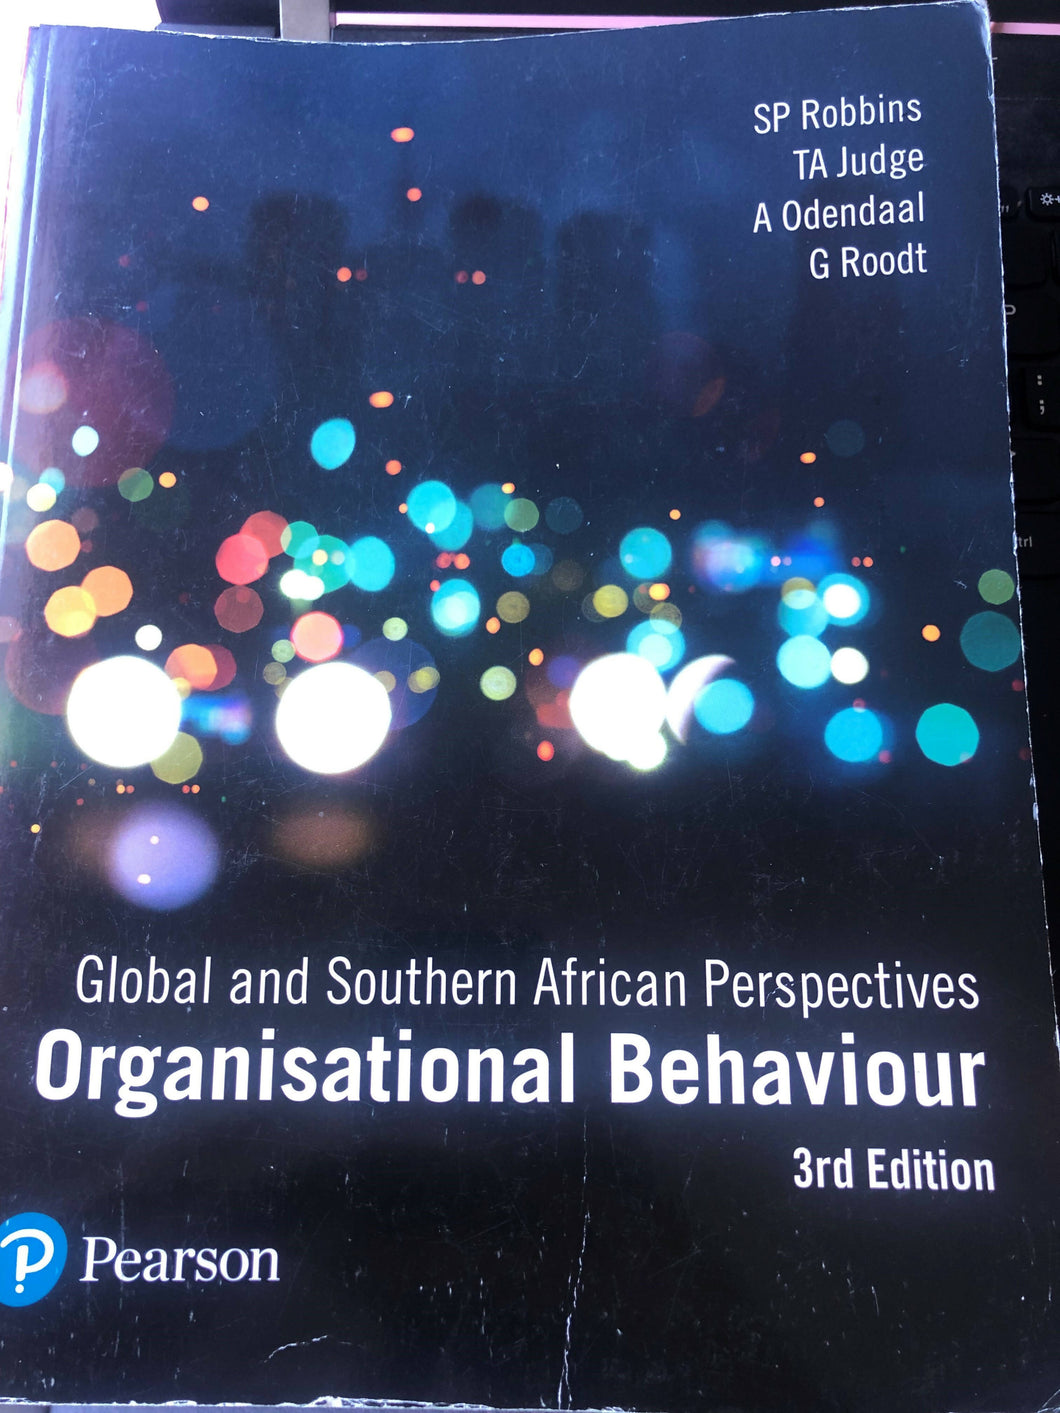 Global And Southern African Perspectives Organisational Behavior 3rd Edition